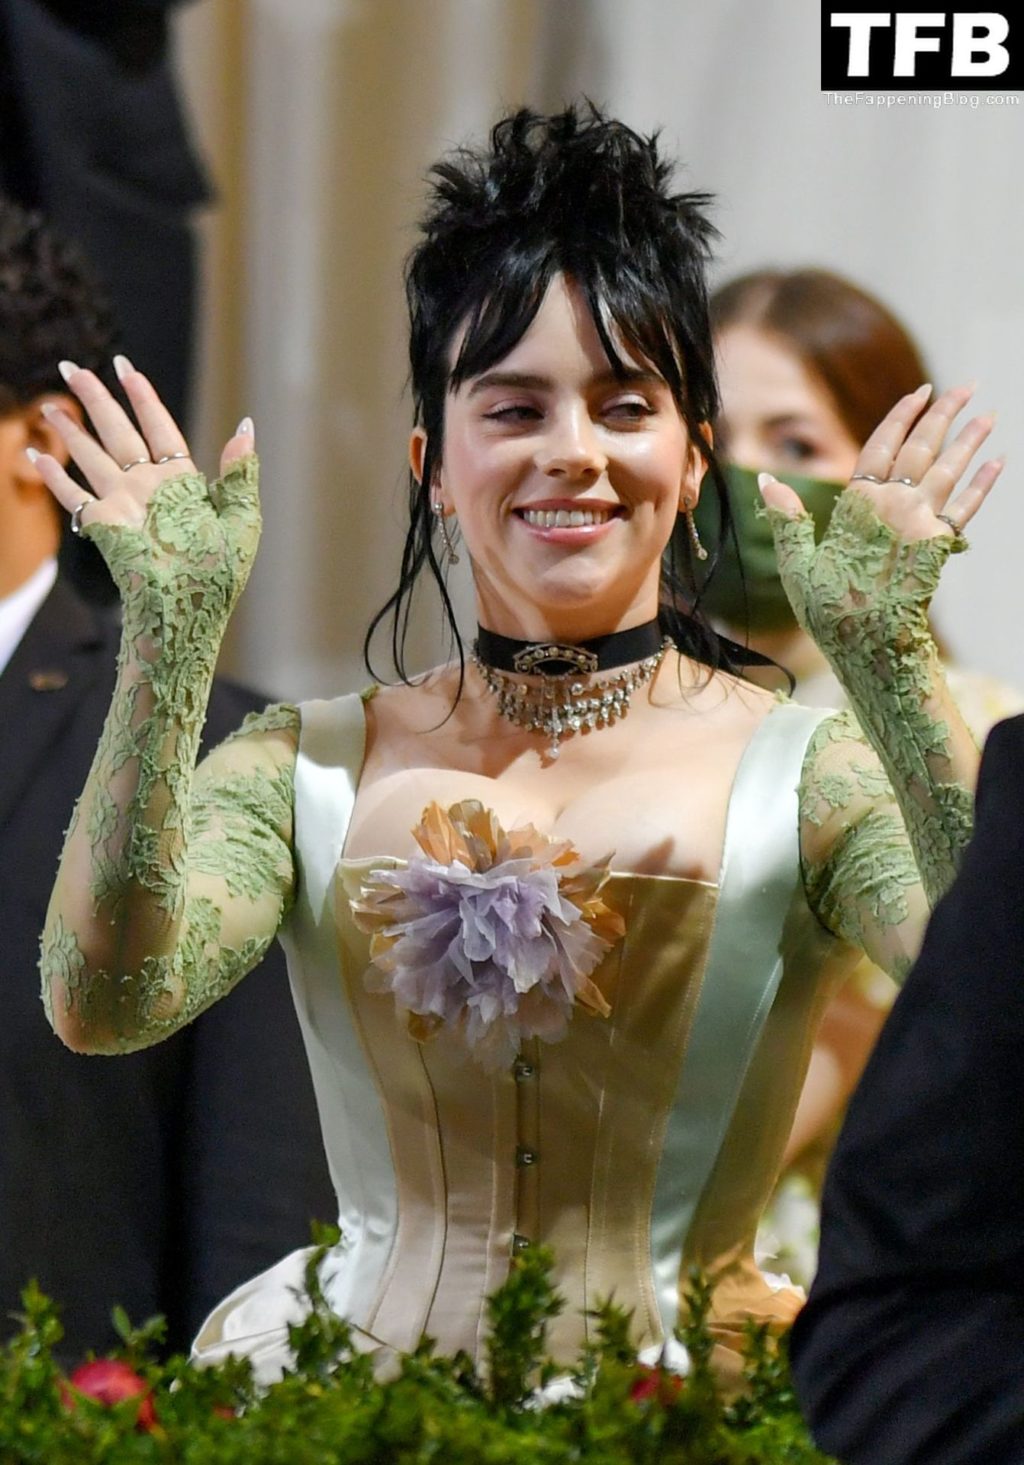 Billie Eilish Sexy The Fappening Blog 147 1024x1465 - Billie Eilish Showcases Nice Cleavage at The 2022 Met Gala in NYC (155 Photos)